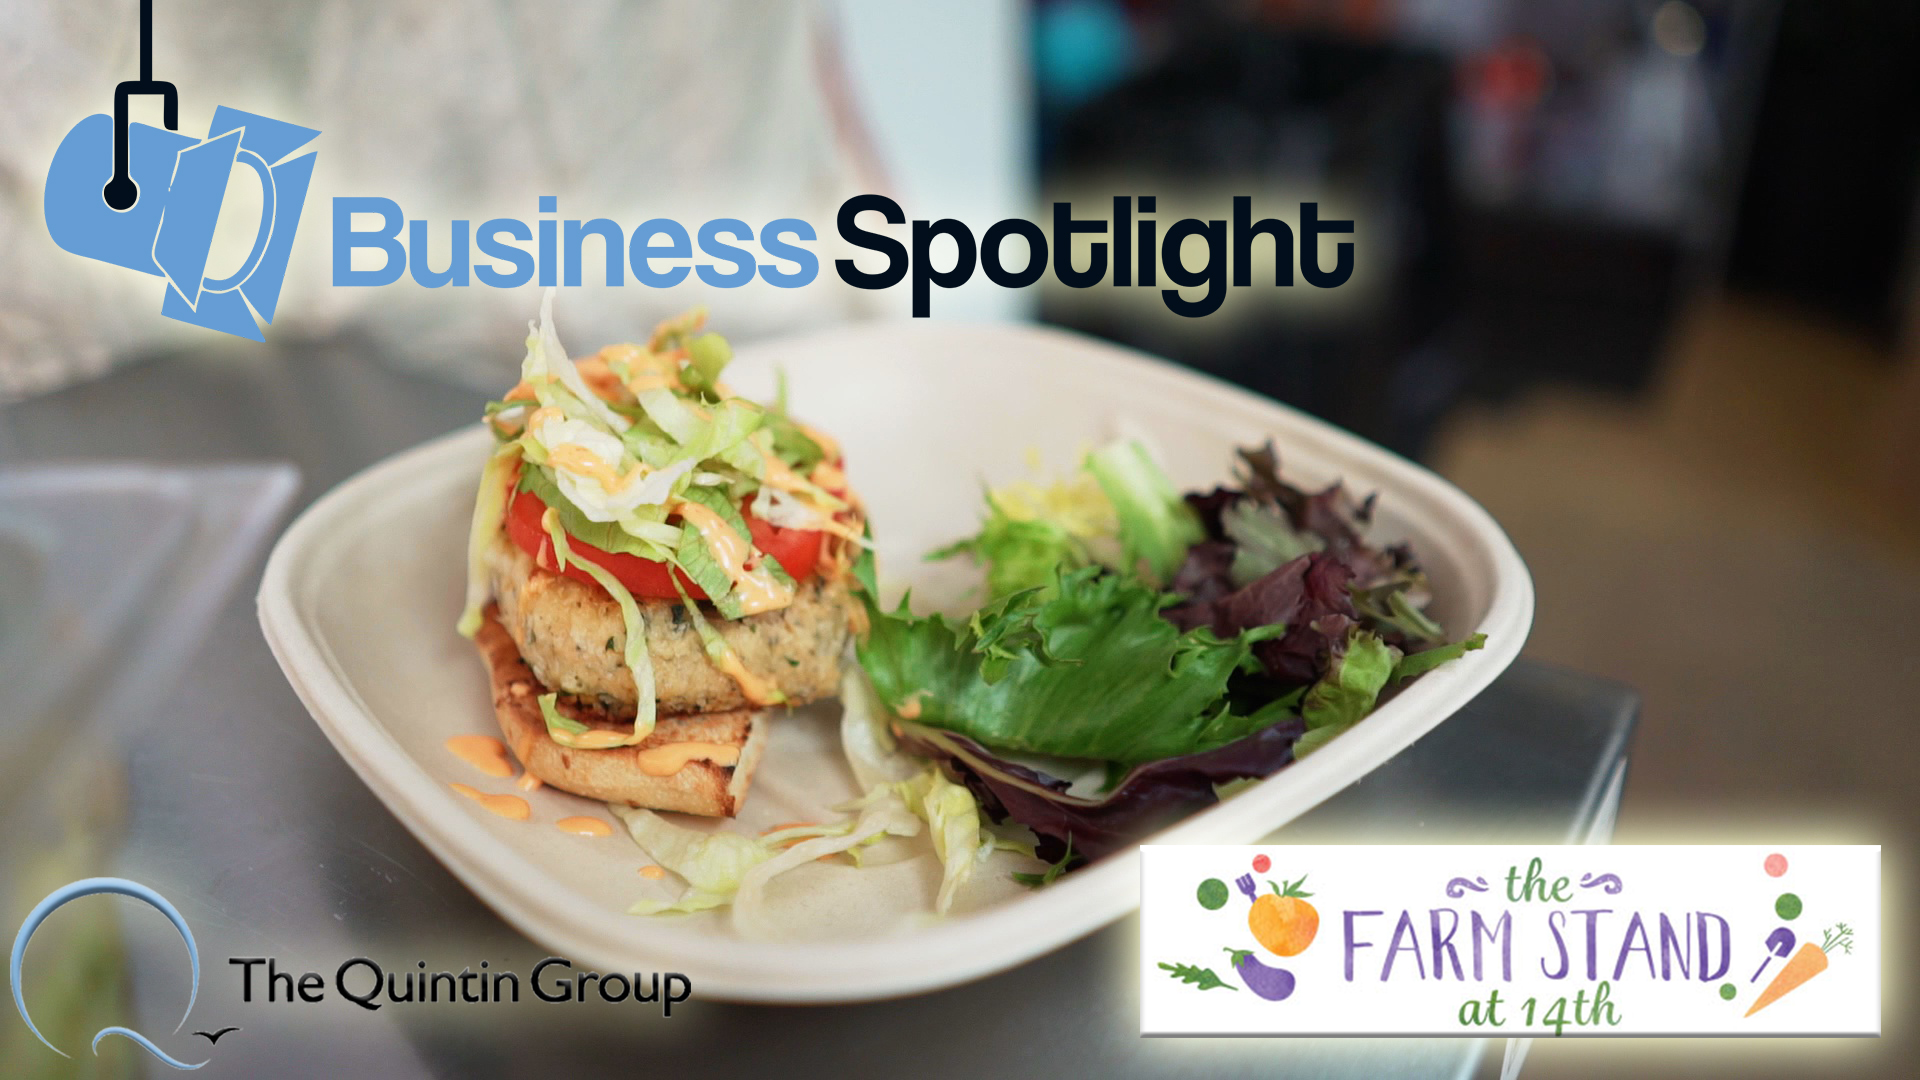 Business Spotlight: The Farm Stand at 14th